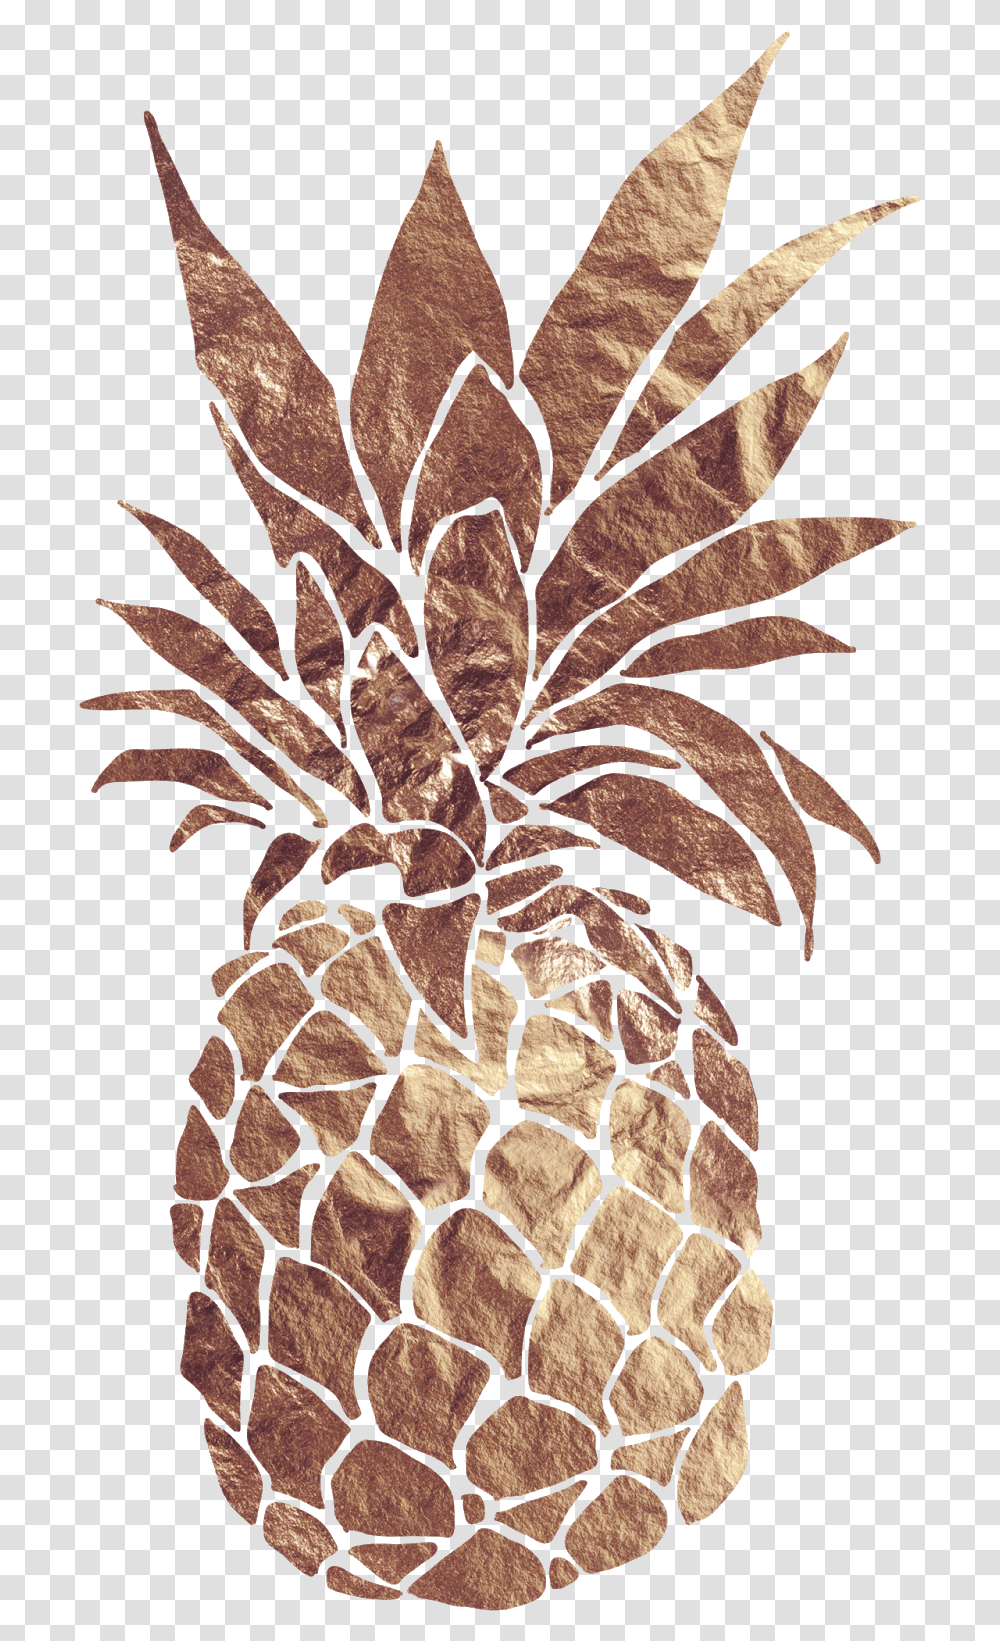 Download Pineapple Vector Clipart Image Watercolour Black And White Printmaking, Rug, Fruit, Plant, Food Transparent Png